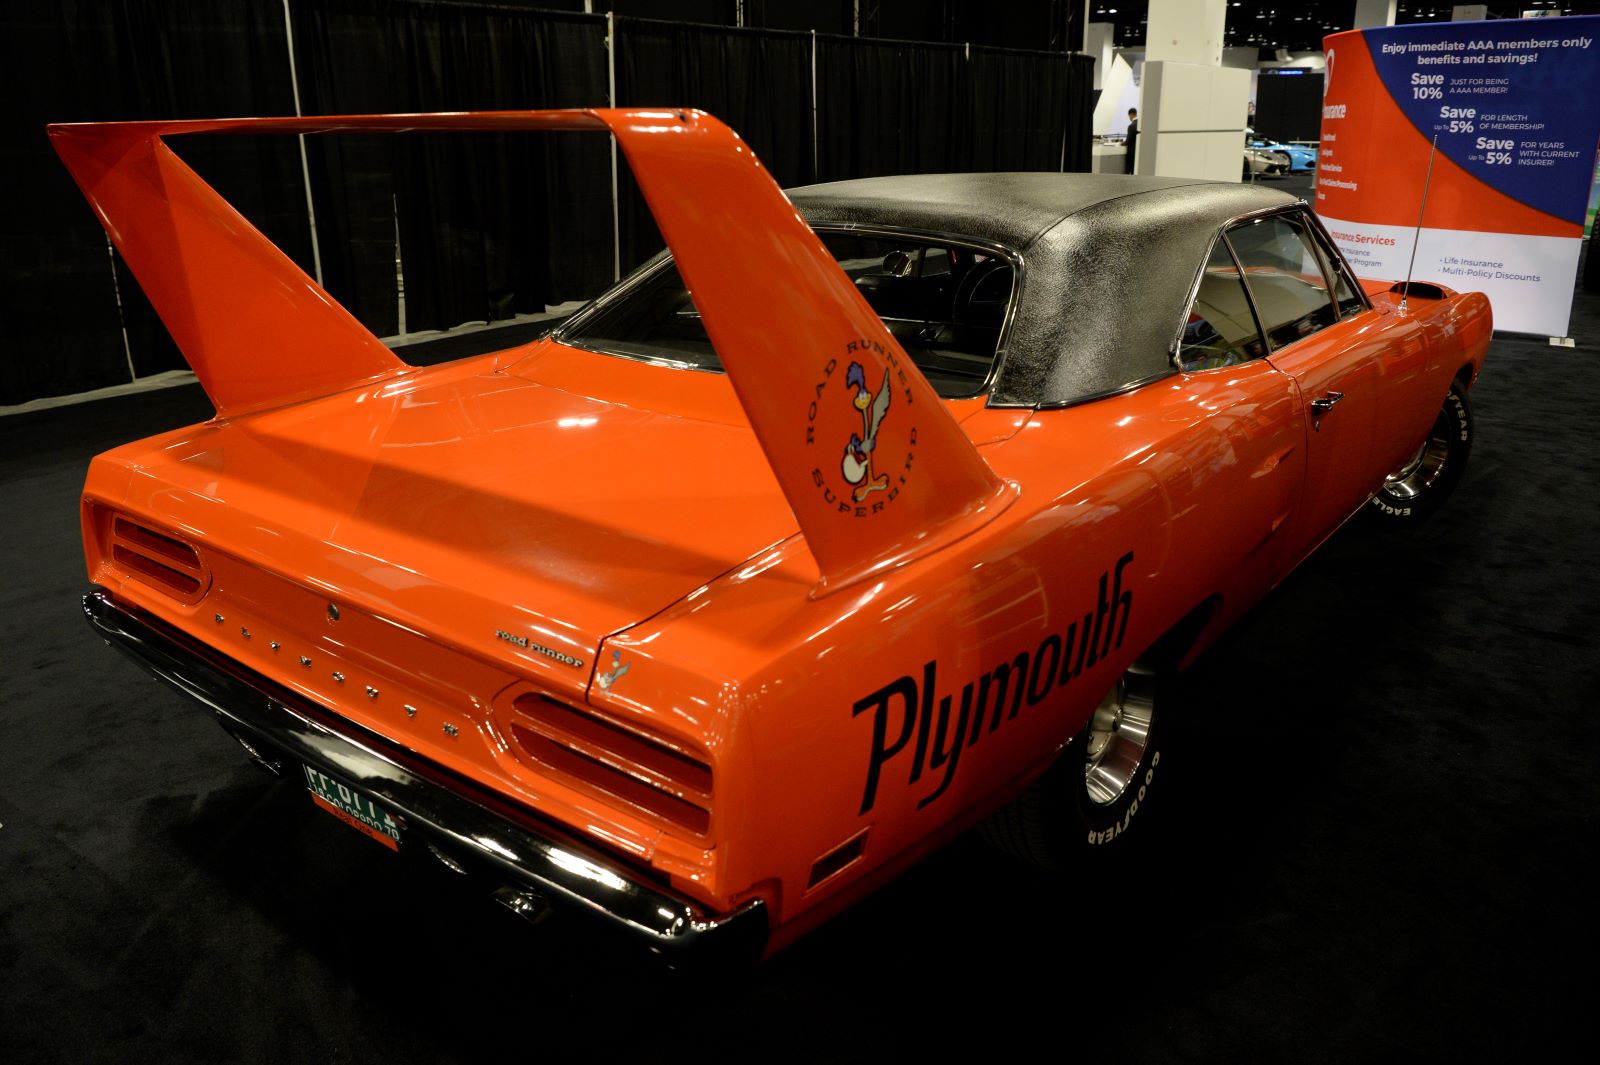 Side-angle rear view of a bright orange 1970 1970 Plymouth Roadrunner Super Bird on display at the Denver Auto Show. This American muscle car had a huge rear spoiler.